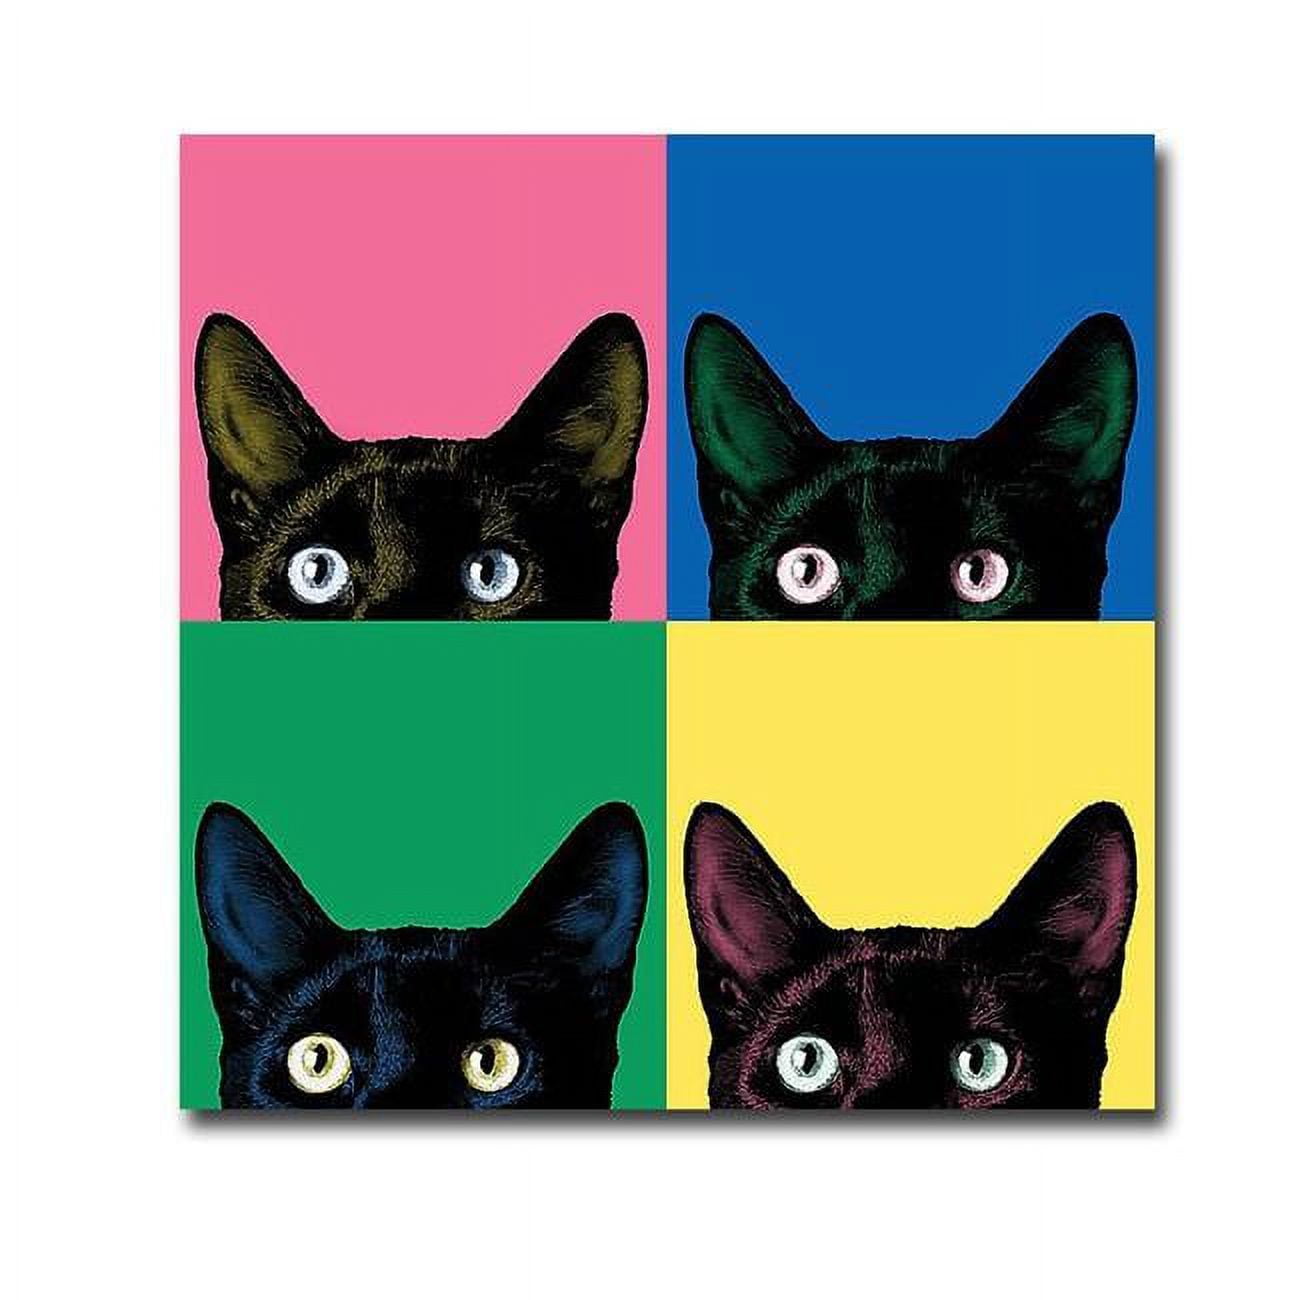 3030546ig Curiosity Pop By Jon Bertelli Premium Gallery Wrapped Canvas Giclee Art - Ready To Hang, 30 X 30 X 1.5 In.